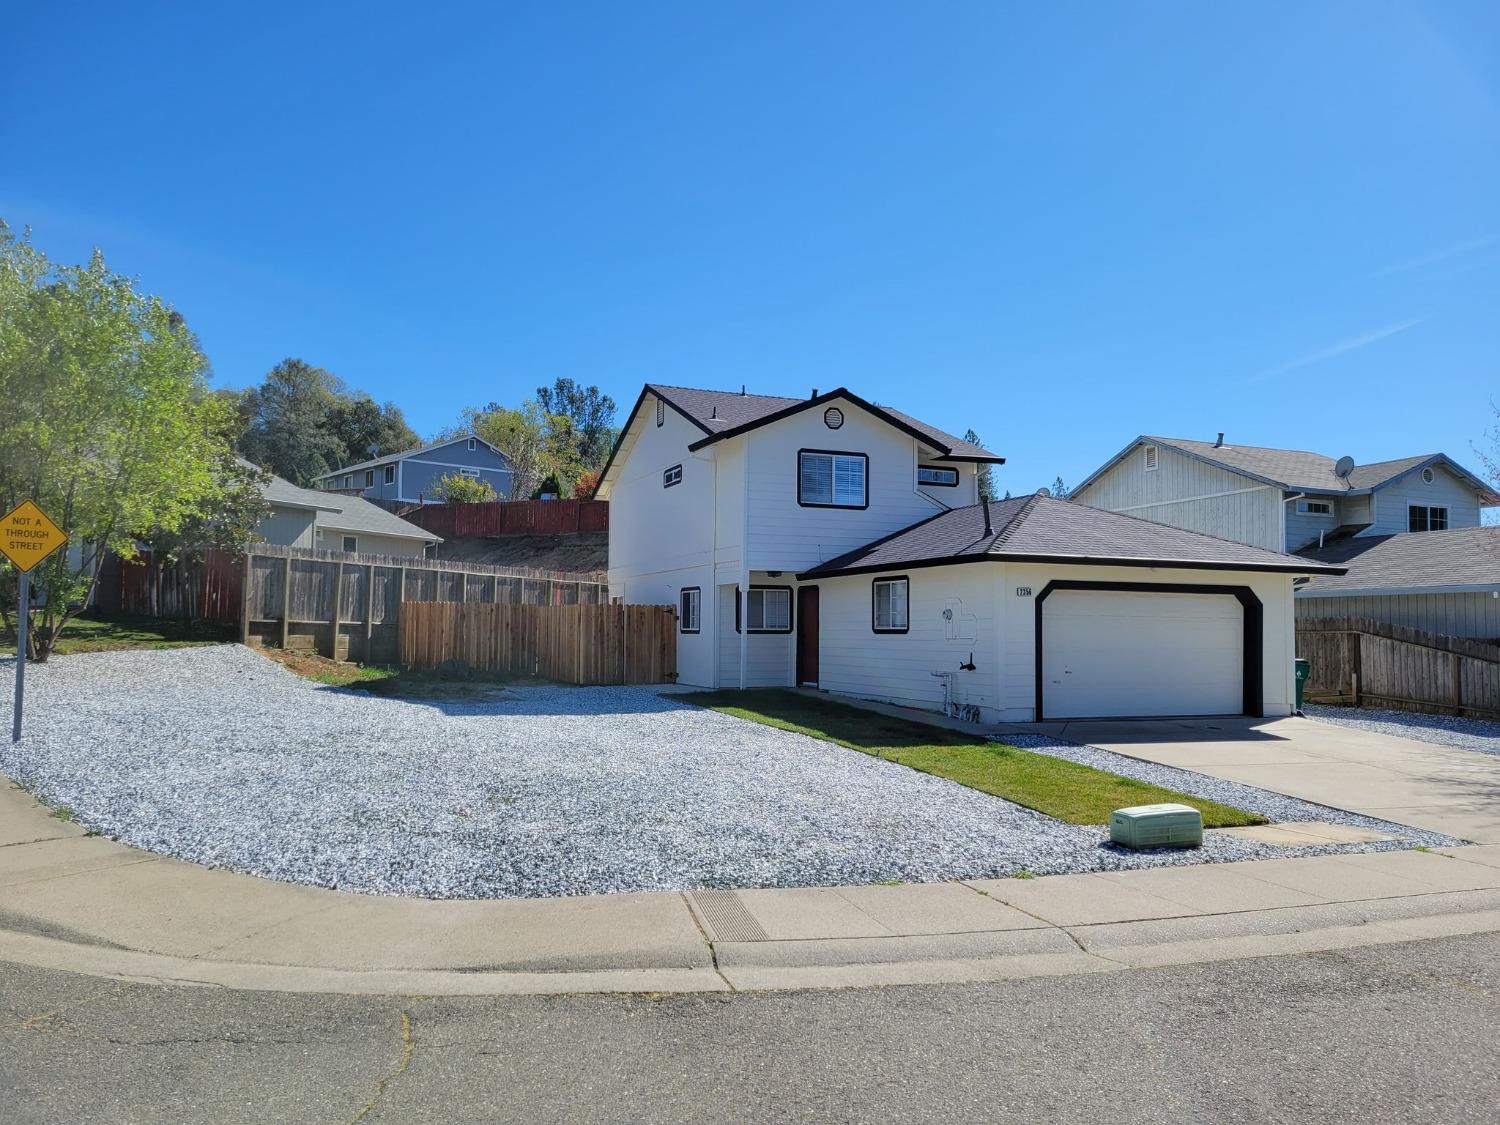 Photo of 2356 Pintail Ln in Placerville, CA